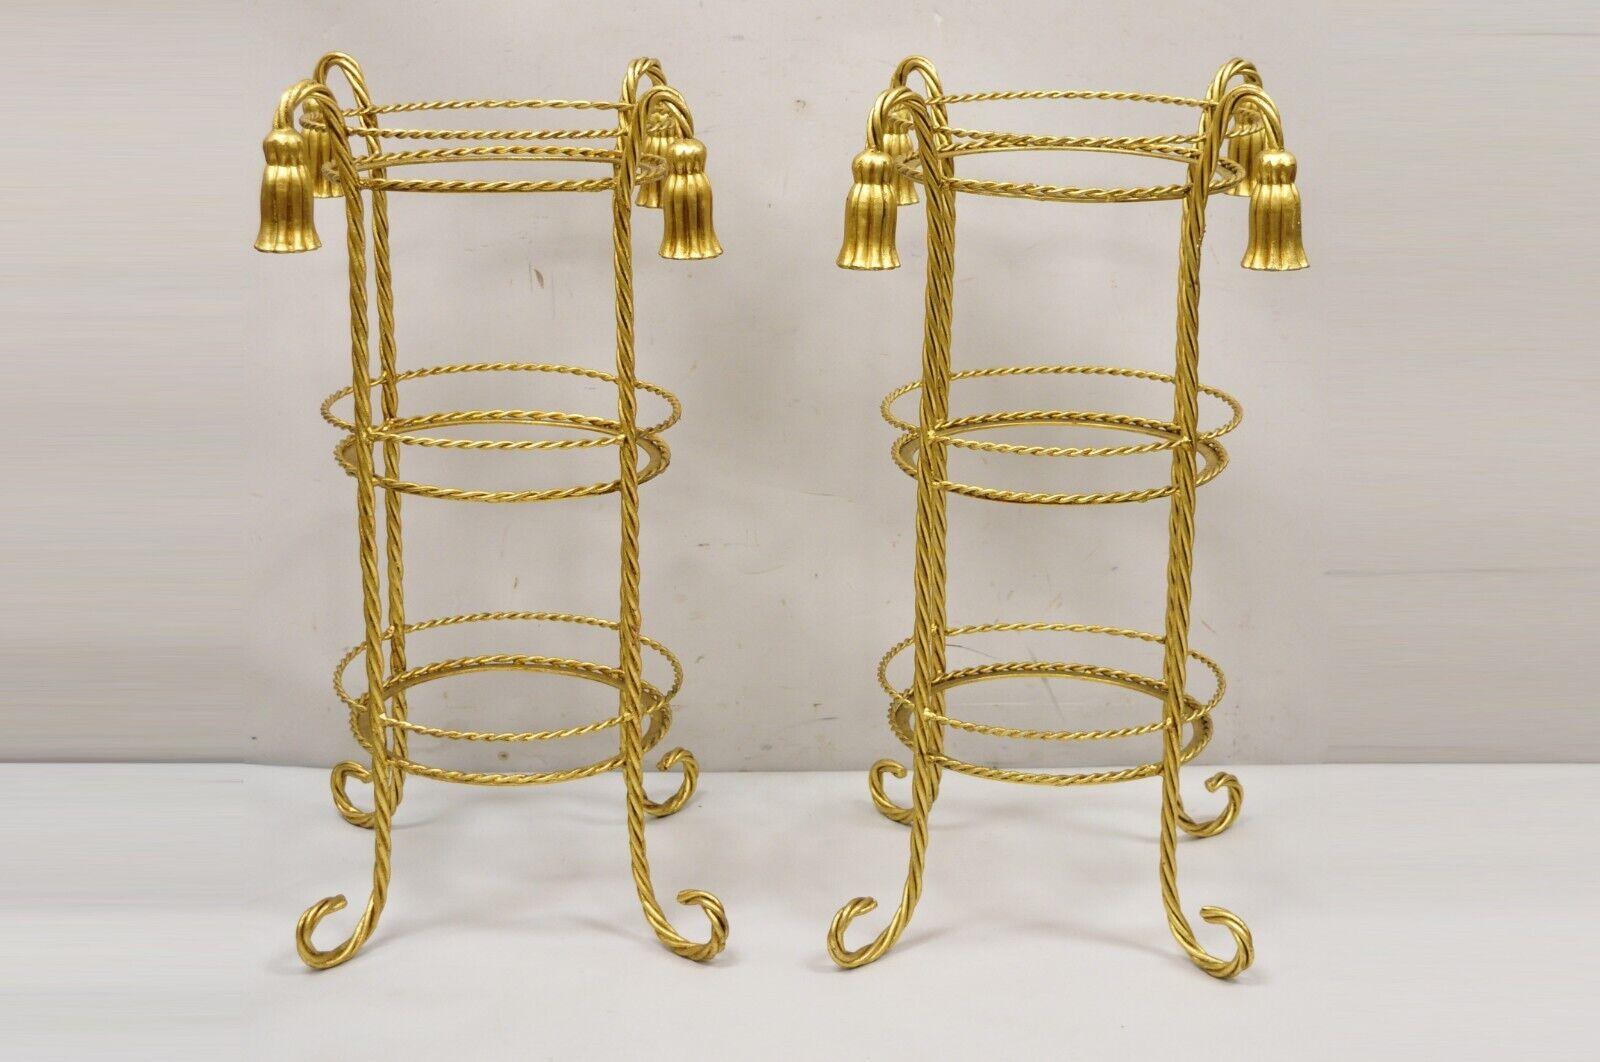 Vintage Italian Hollywood Regency 3 Tier Gold Iron Rope Tassel Muffin stand Accent Side Tables - a Pair. Item features 3 round tiers (approx. 11.25 diameter. Does not include glass). Iron metal frame, gold leaf gilt finish, tassel form accents,